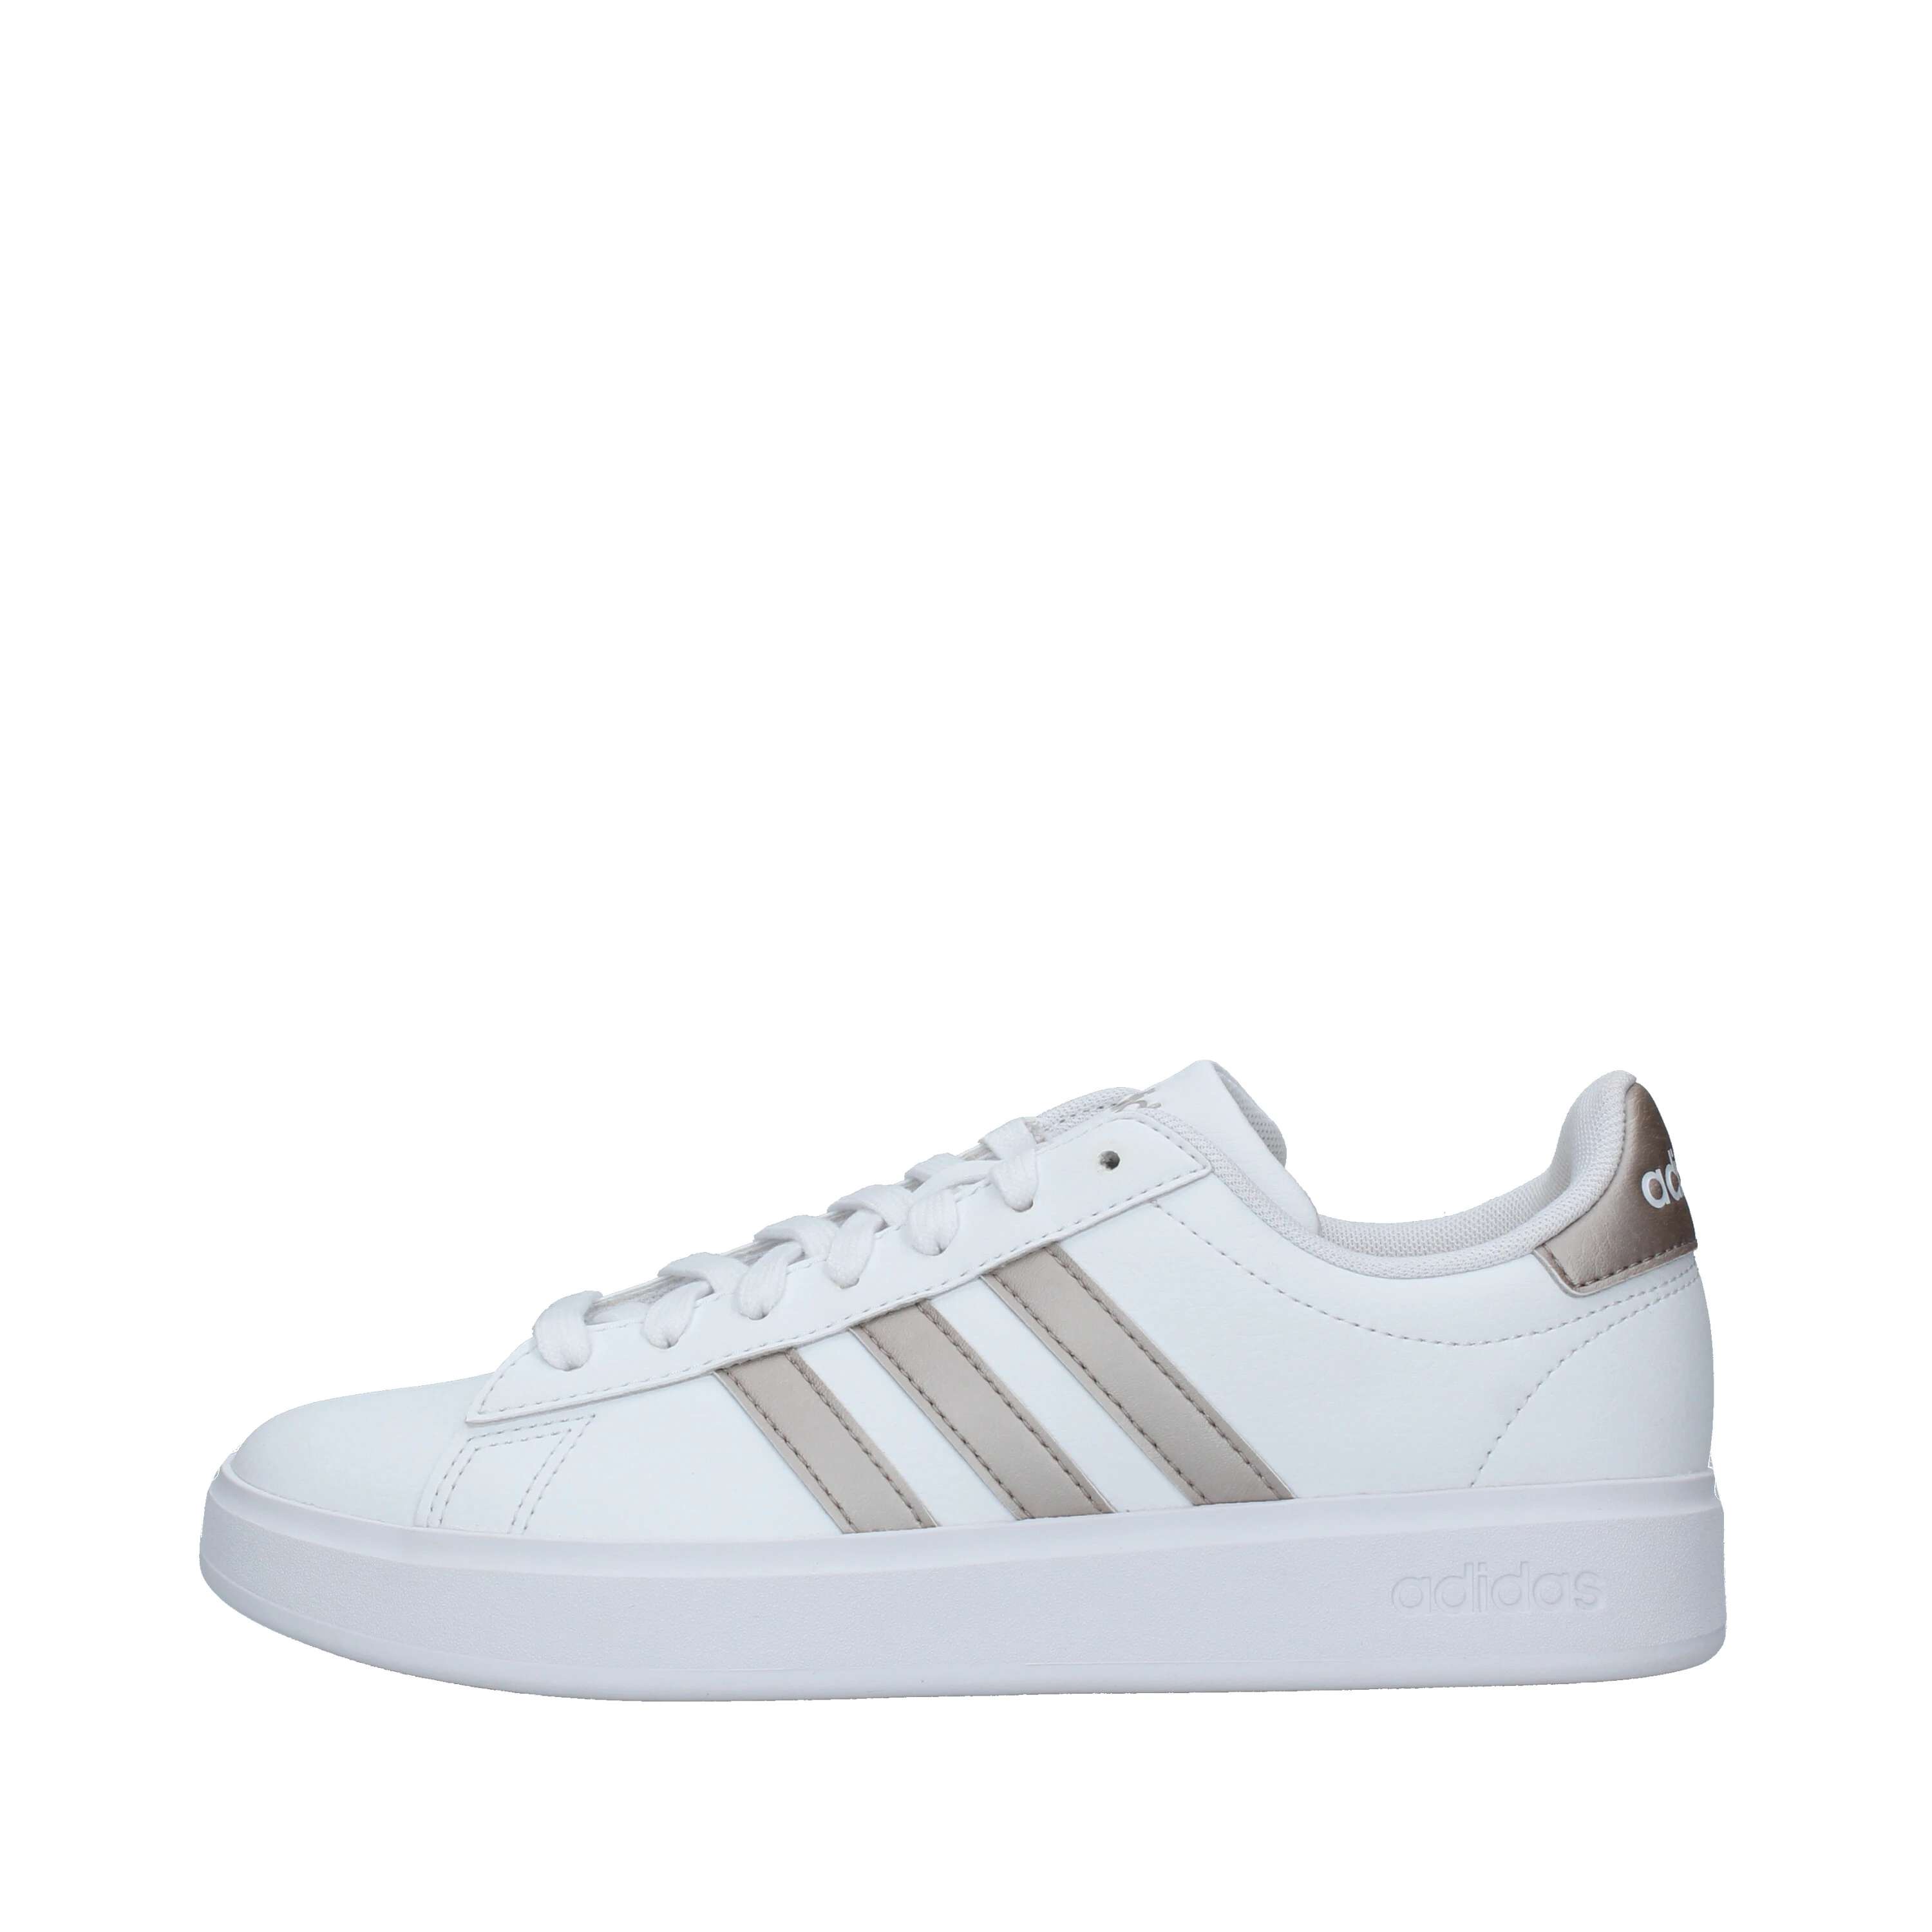 SNEAKERS GRAND COURT 2.0 DONNA BIANCO RAME